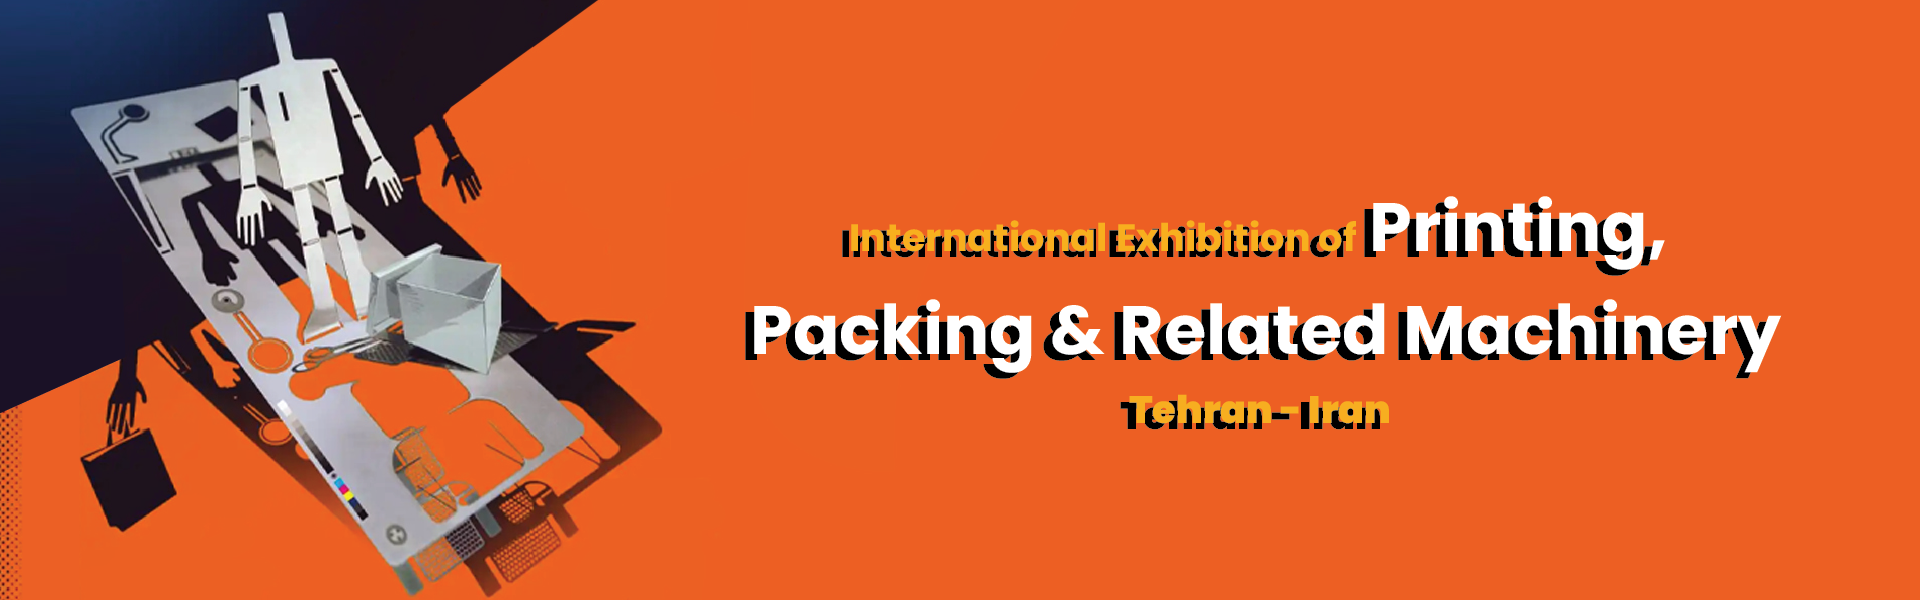 Printing, Packaging and Processing Exhibition of Iran Tehran